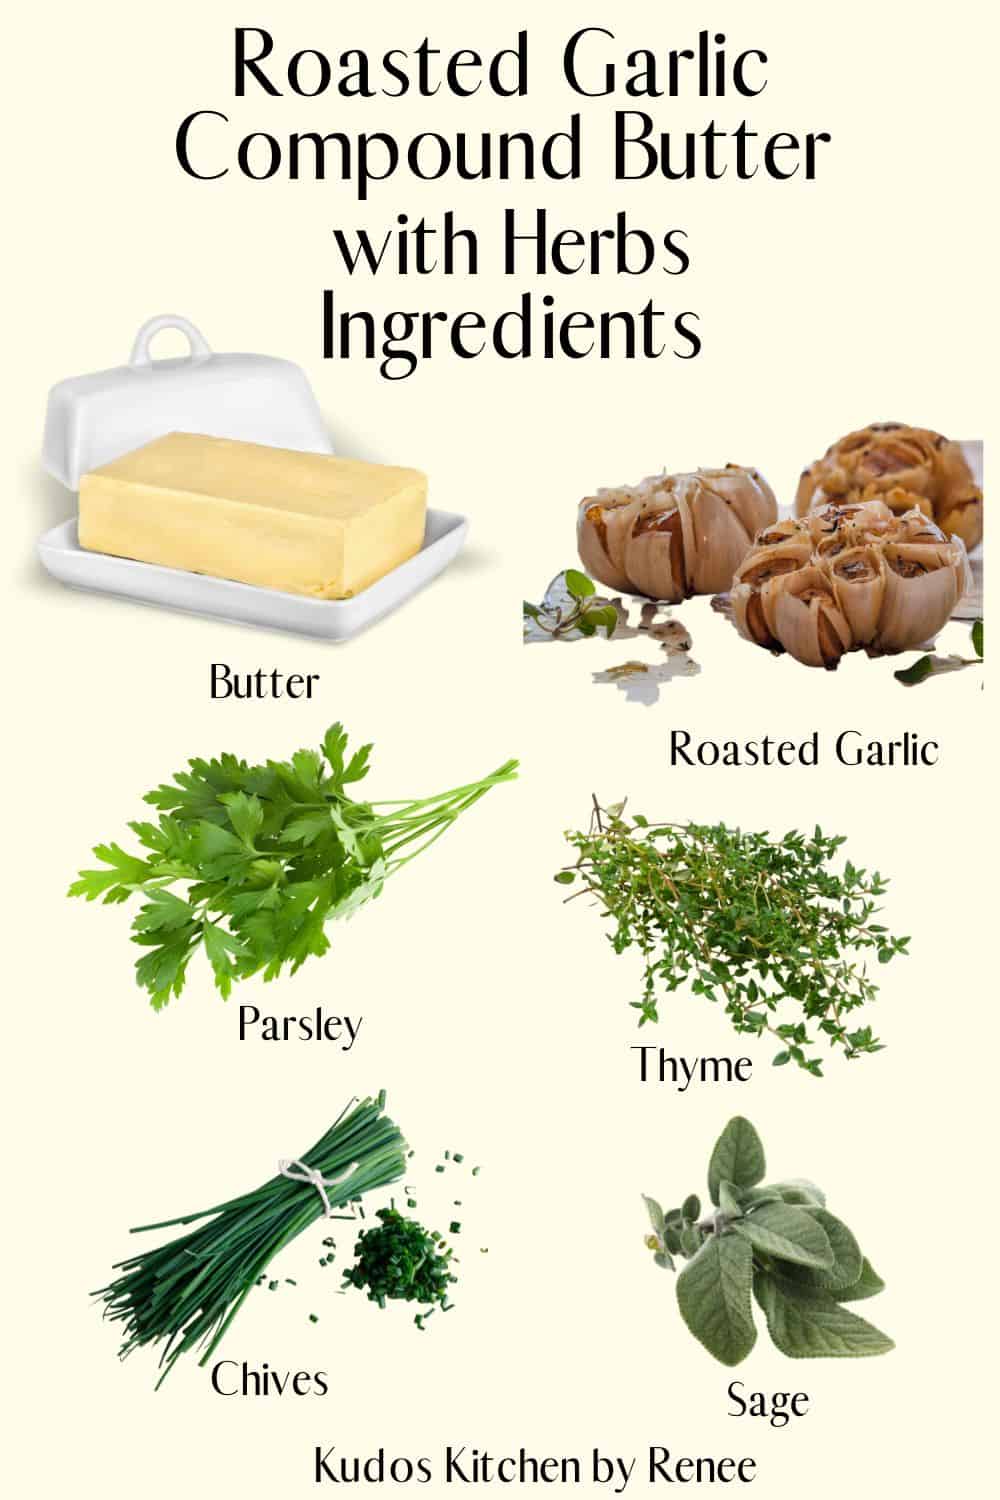 A visual ingredient list for how to make Roasted Garlic Compound Butter with Herbs.